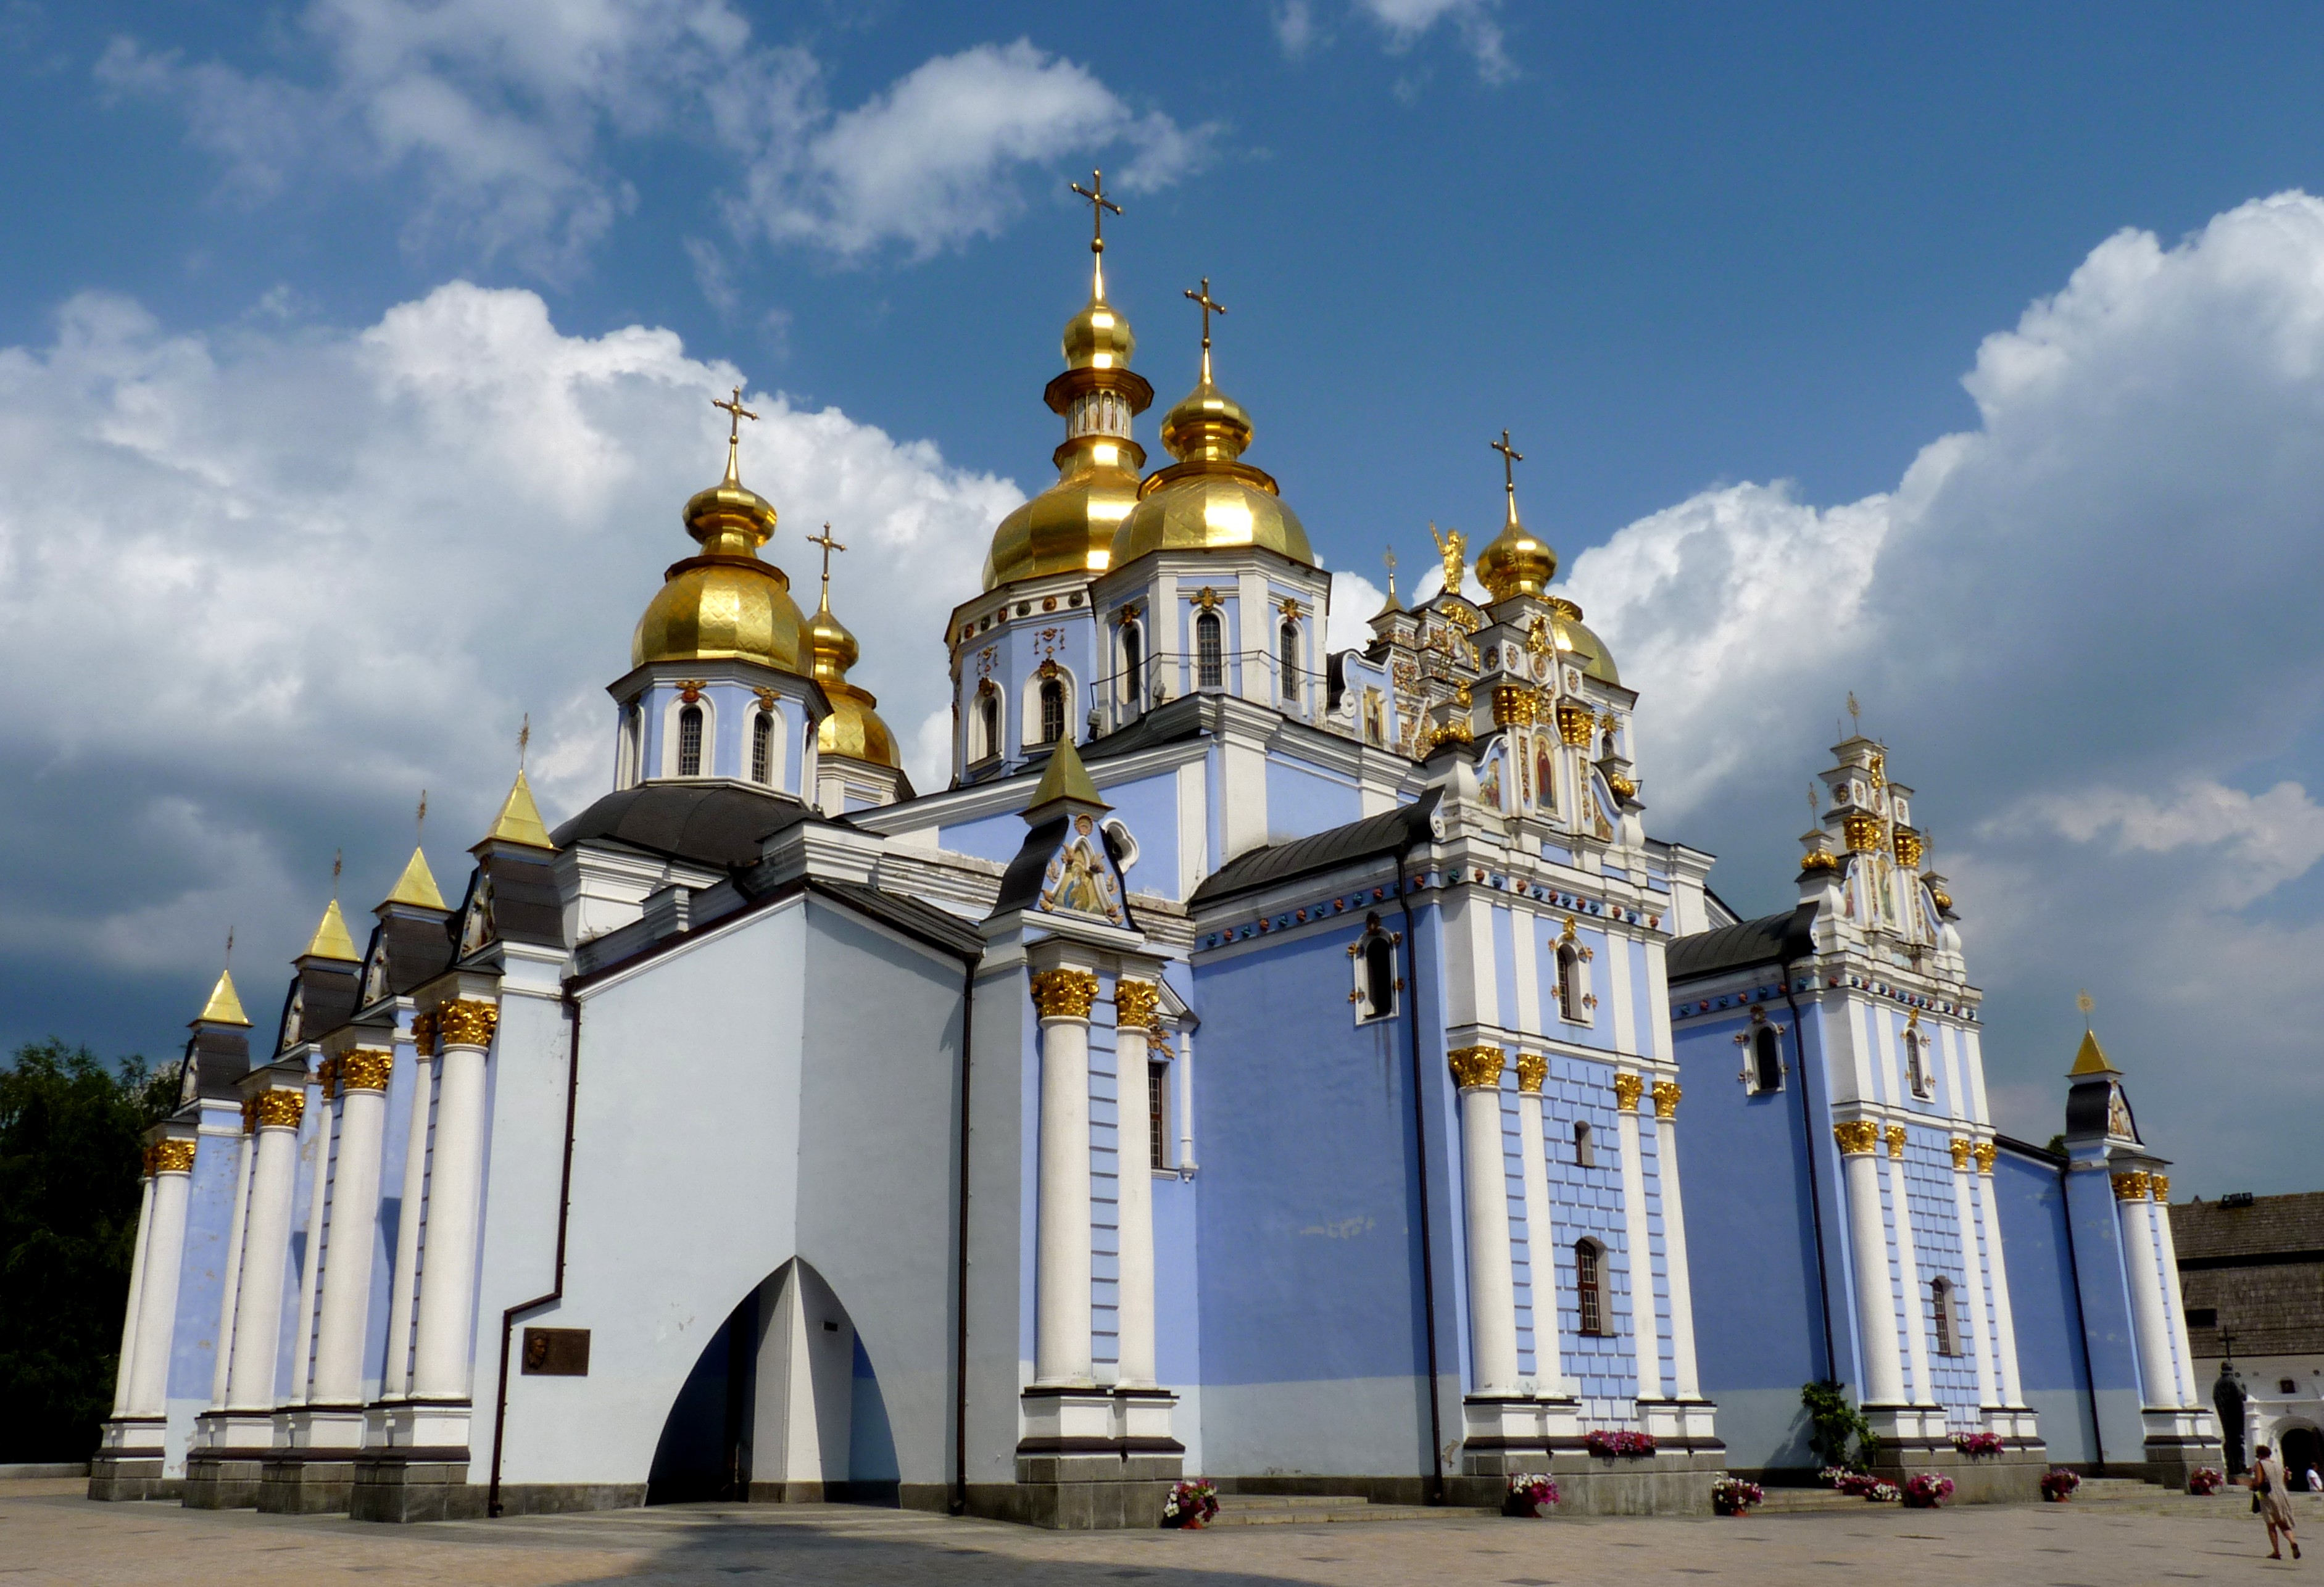 Amazing St. Michael's Golden-domed Monastery Pictures & Backgrounds